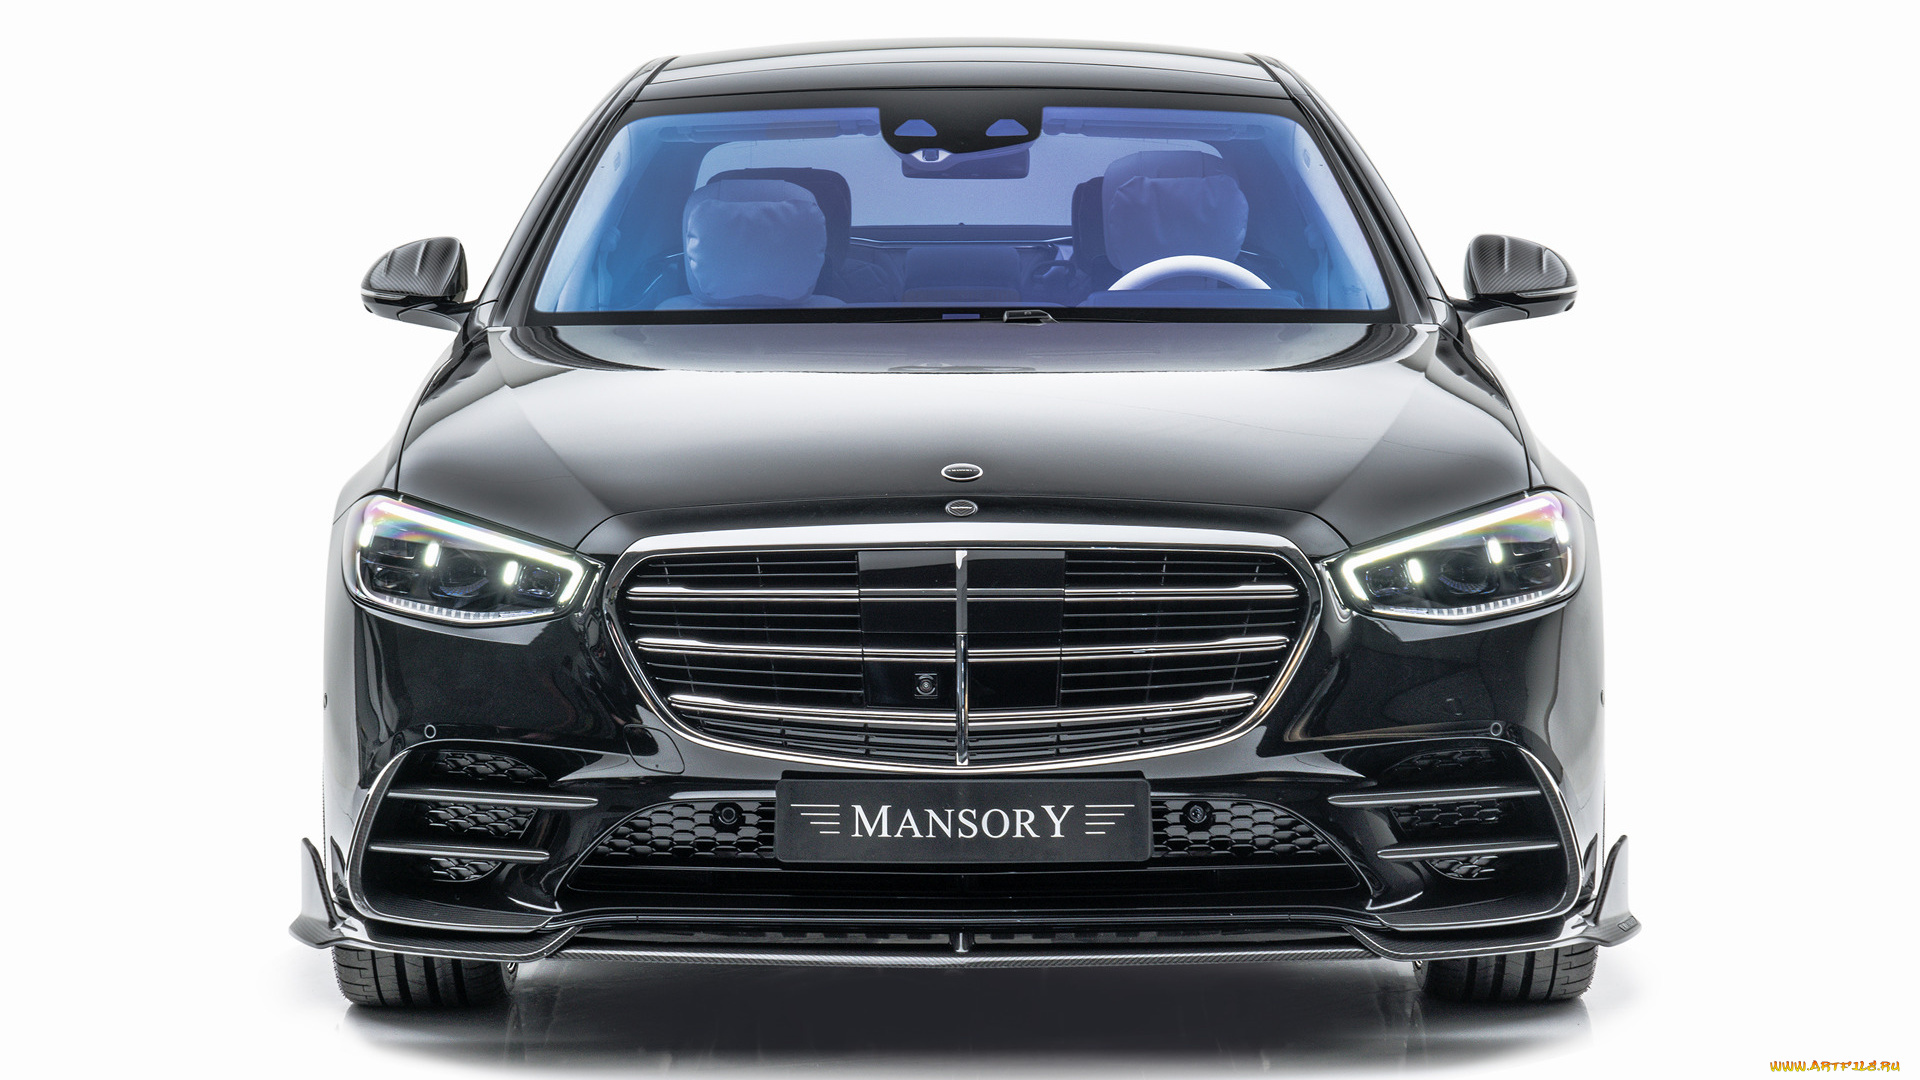 mercedes-benz, s-class, by, mansory, 2021, автомобили, mercedes-benz, mercedes, benz, s, class, by, mansory, 2021